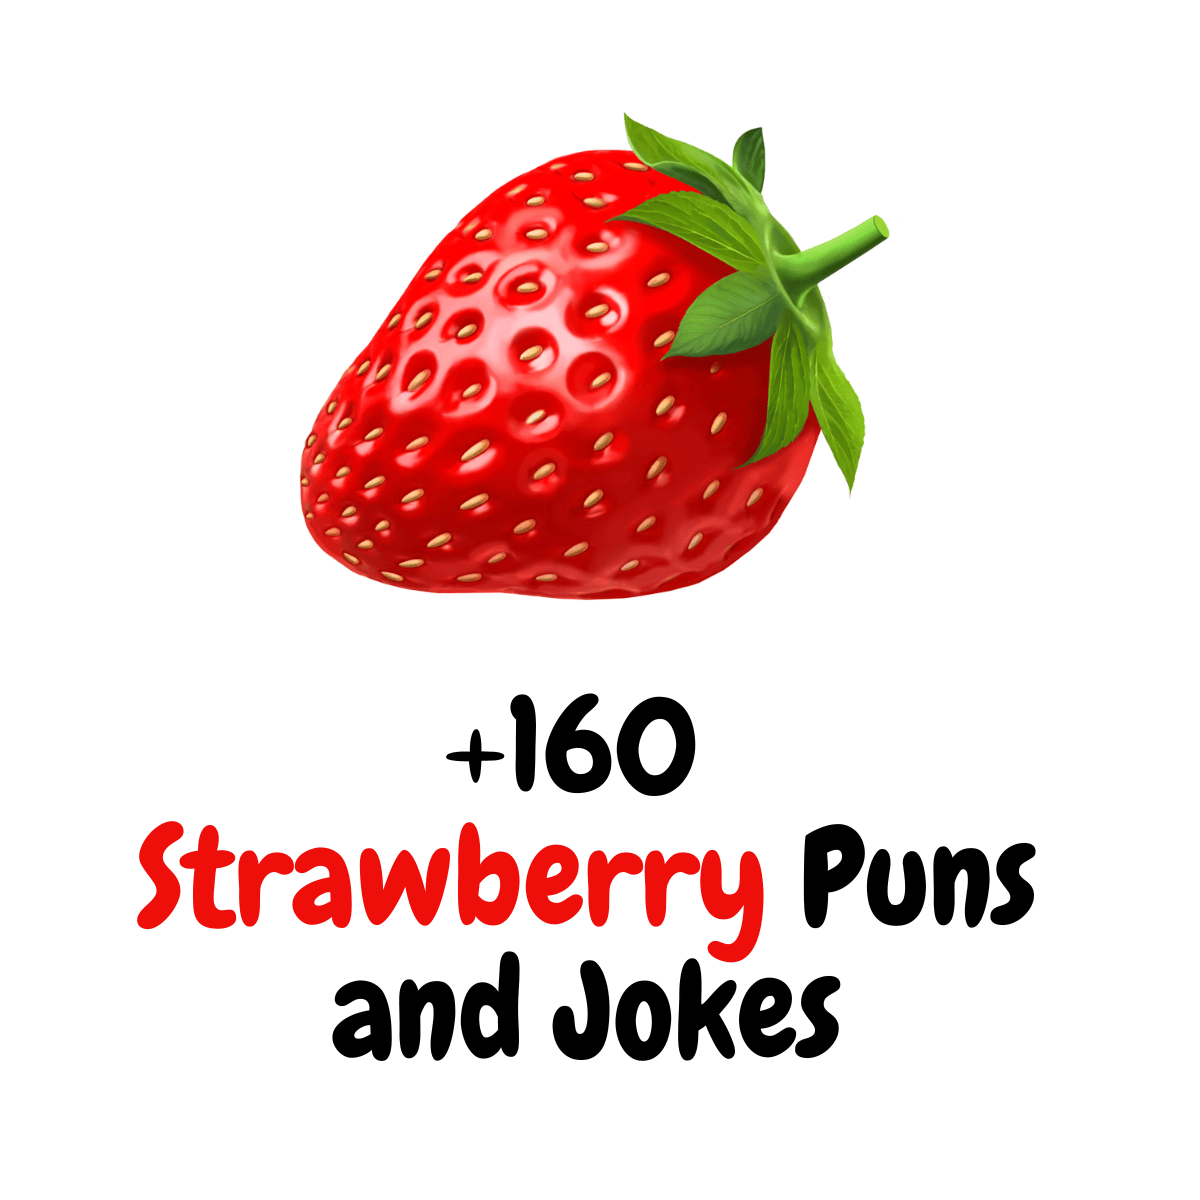 +130 Strawberry Puns and Jokes to Brighten Your Day